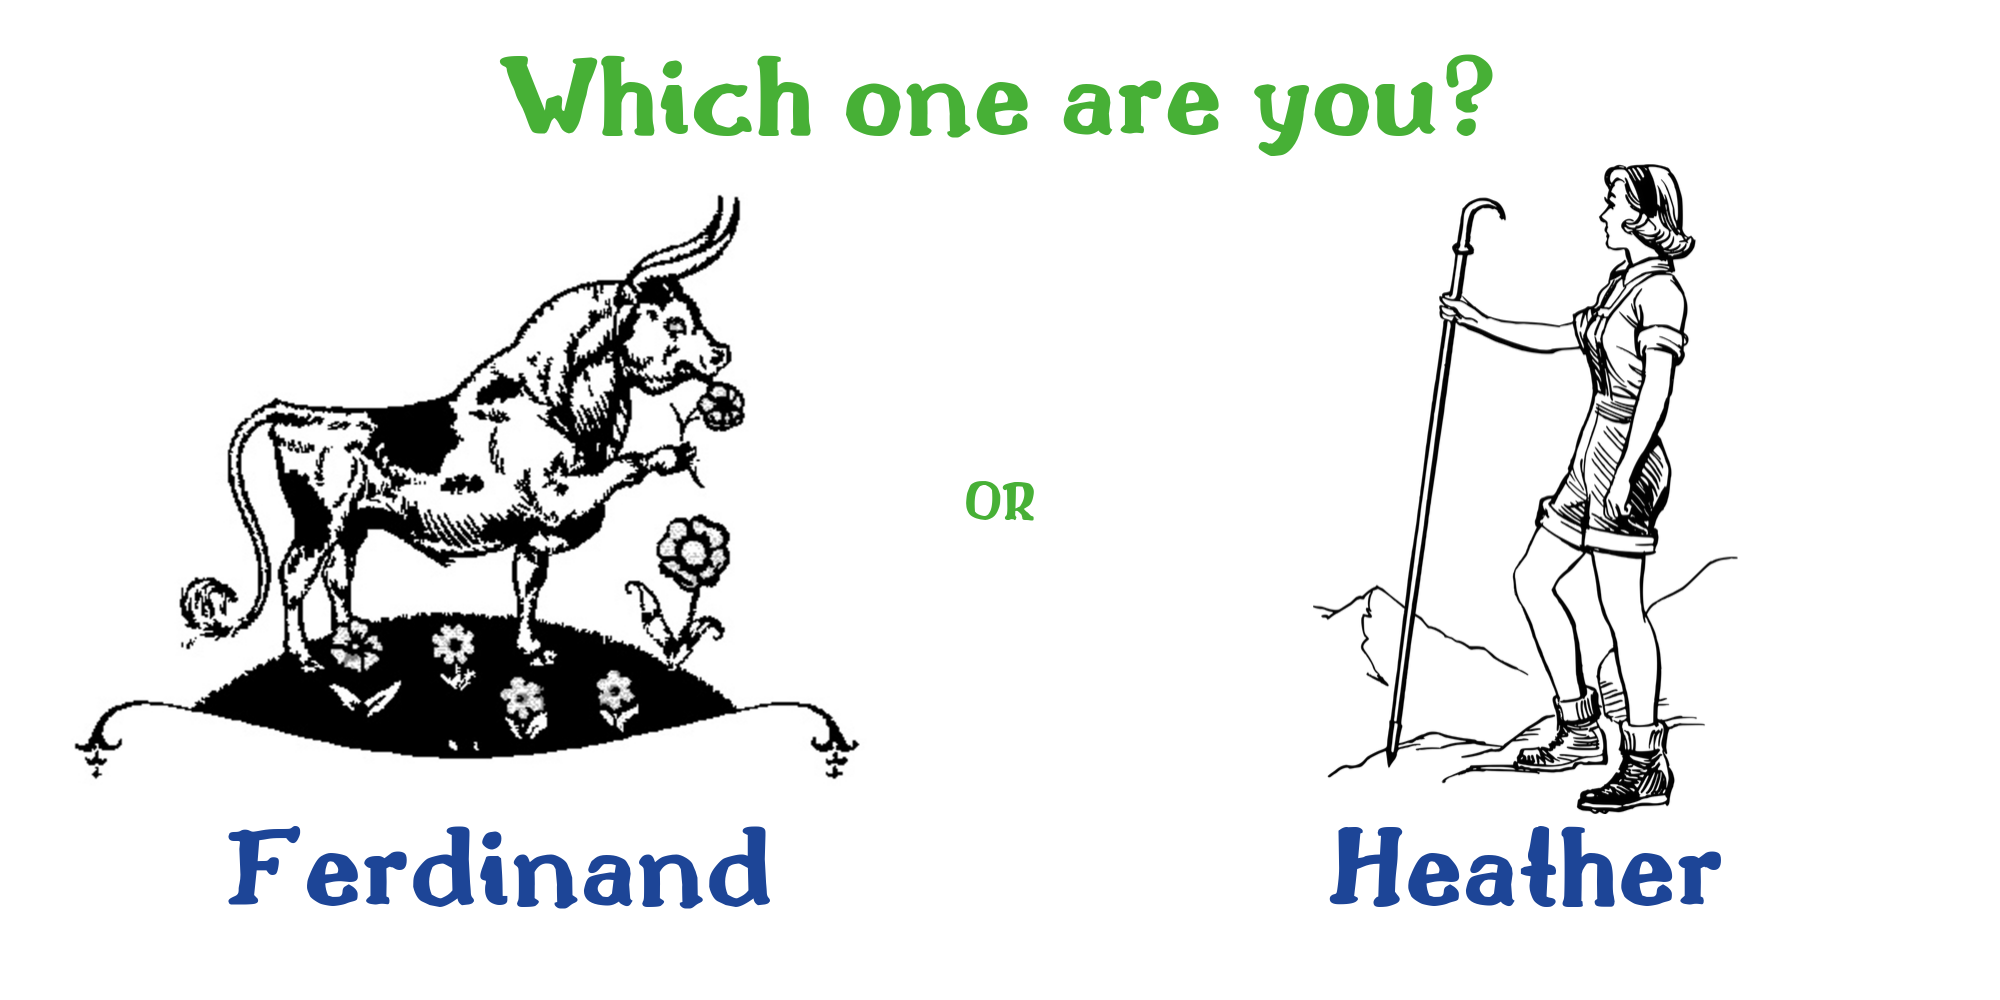 Are you a Ferdinand or a Heather?